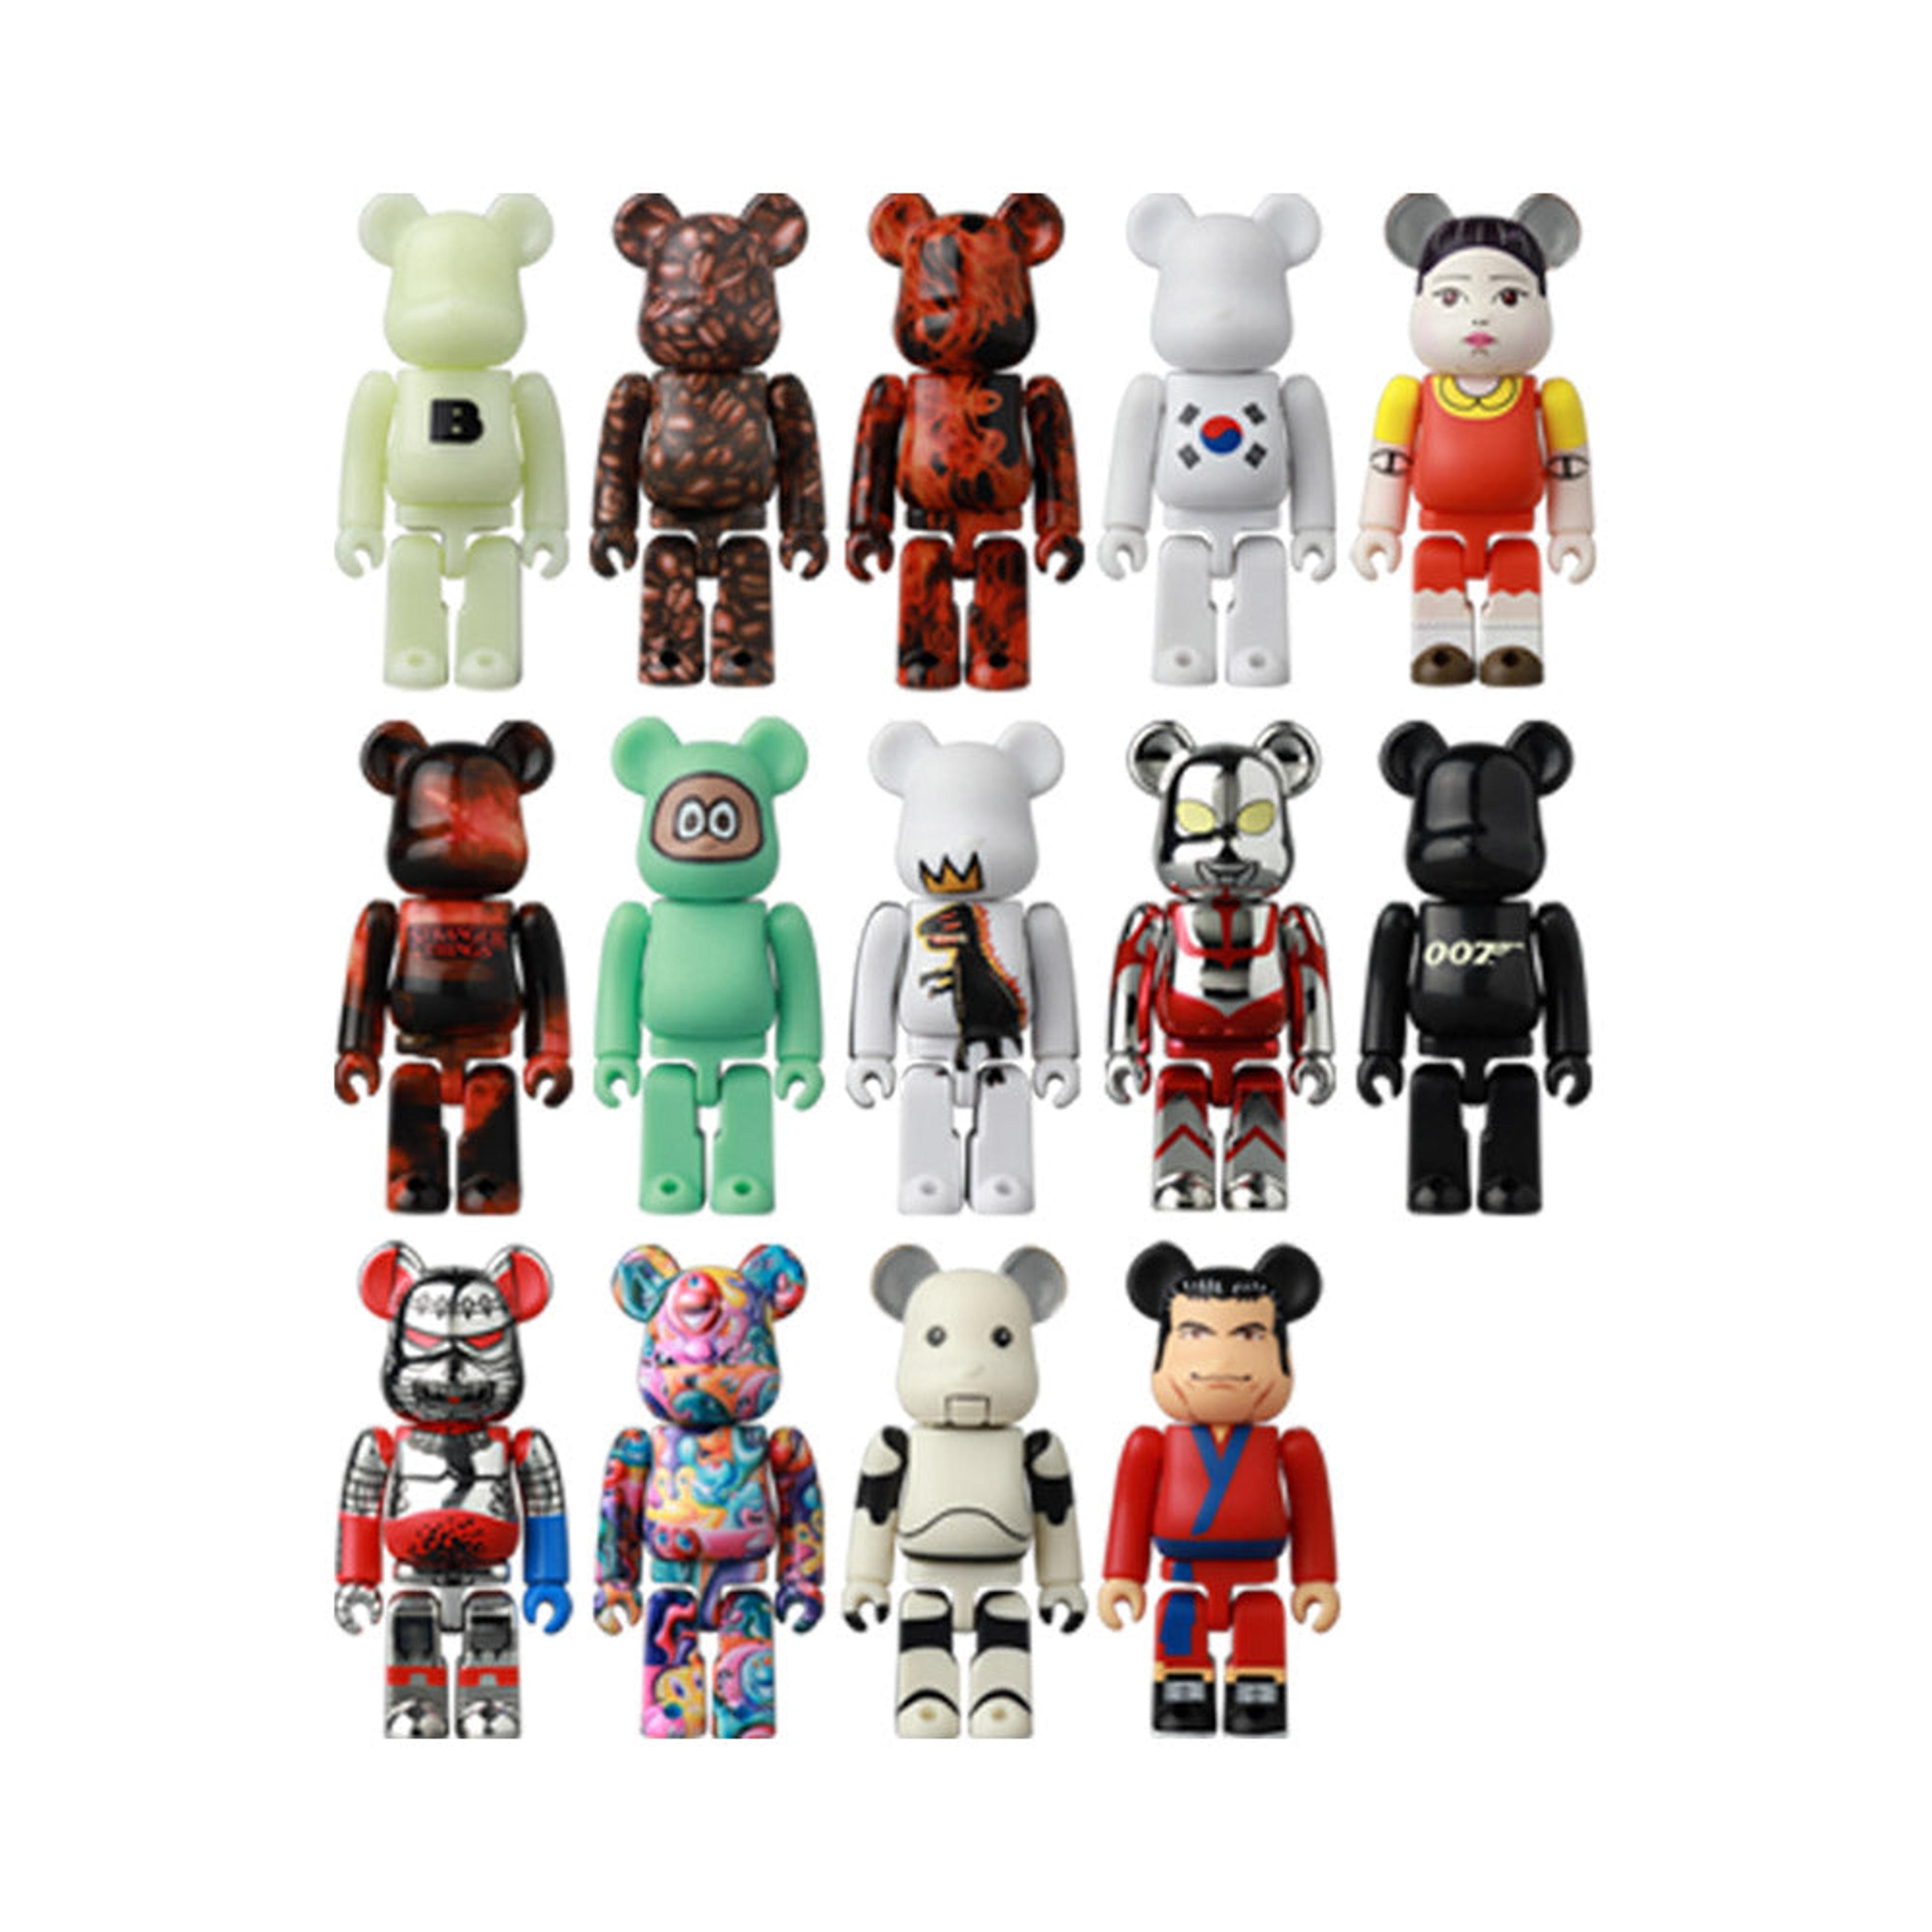 Alternate View 1 of Bearbrick Series 44 Display Case (24 Blind Boxes) by Medicom Toy